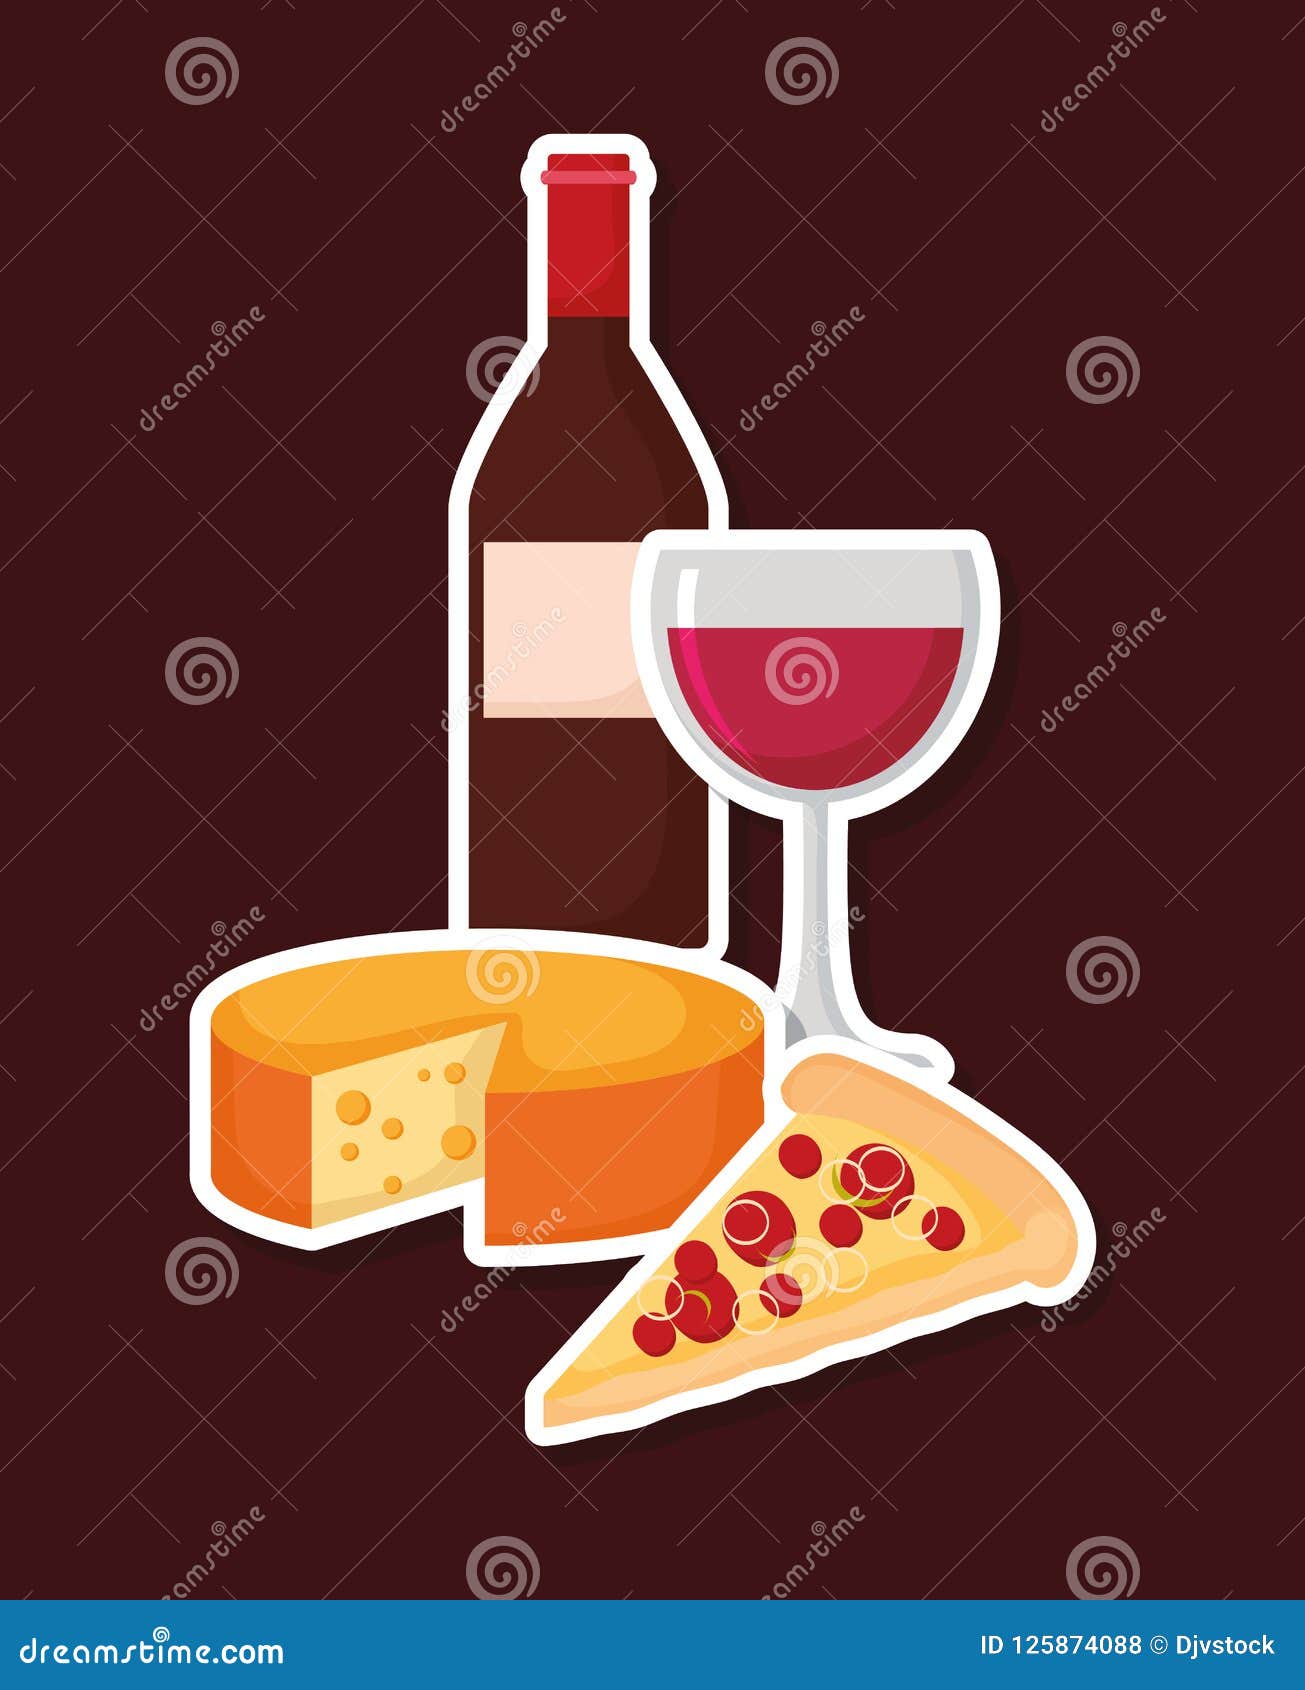 Wine Bottle with Cheese and Pizza Stock Vector - Illustration of sweet ...